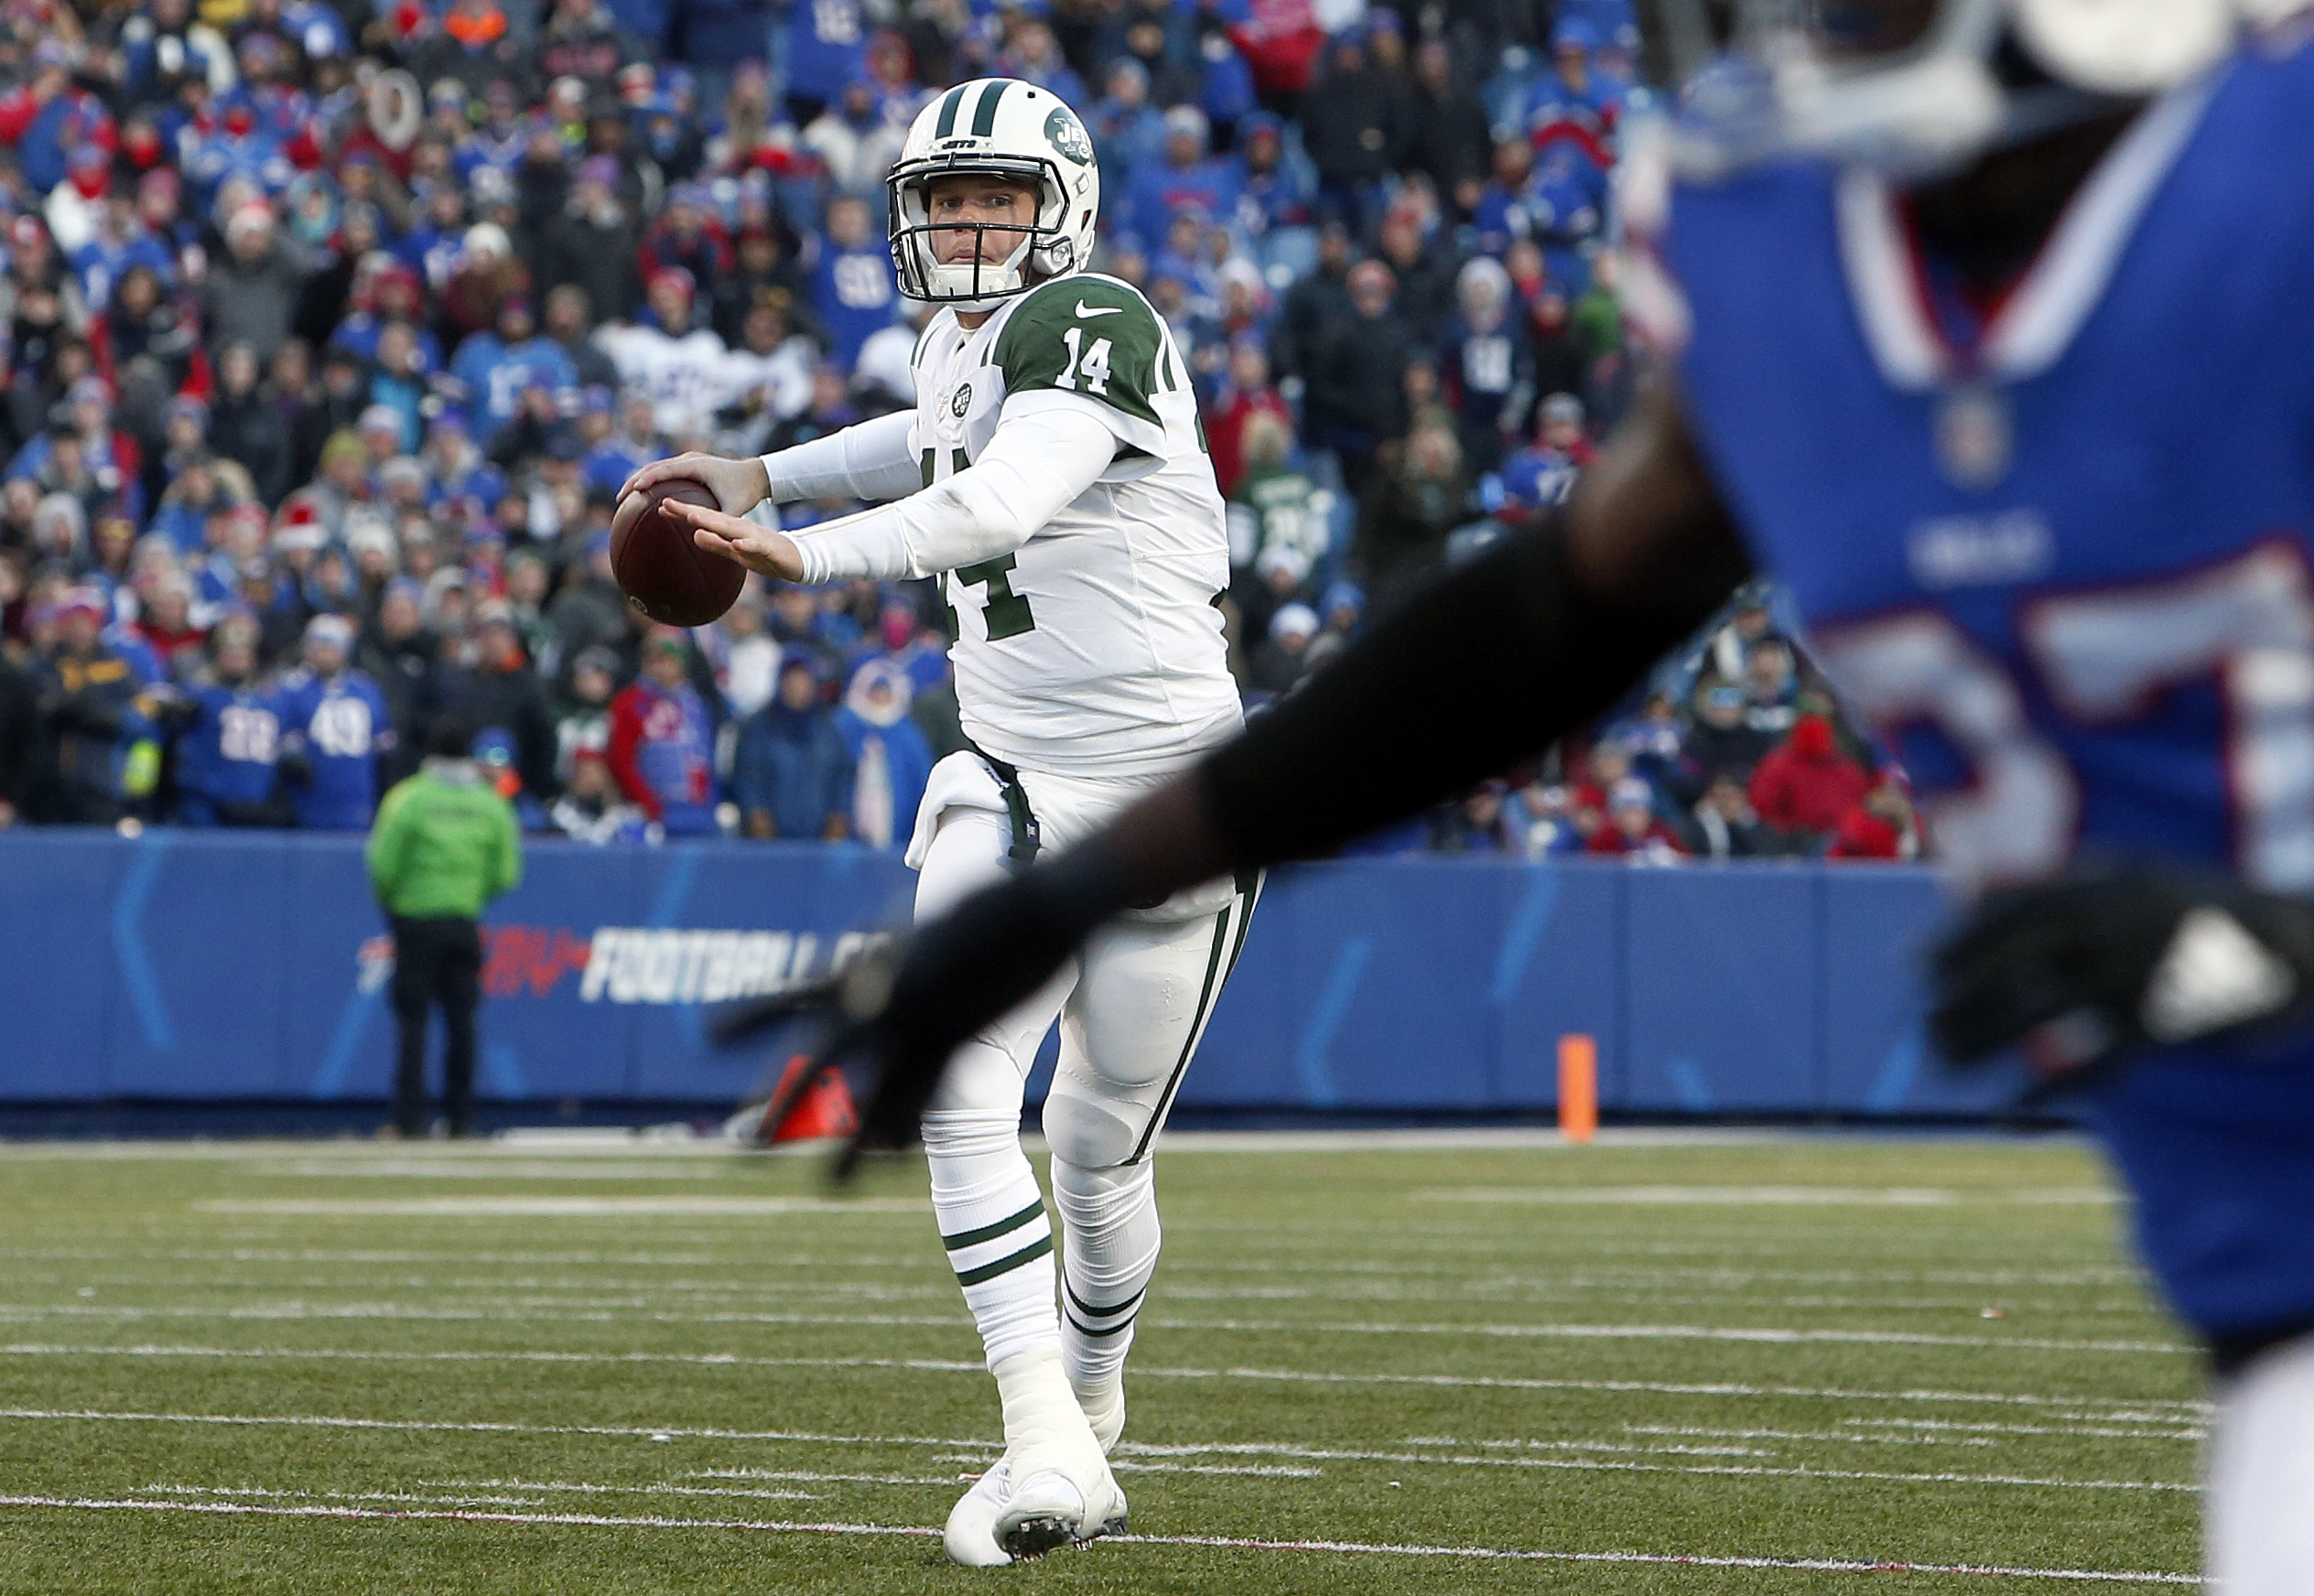 Darnold leads Jets to 27-23 win over Allen, Bills